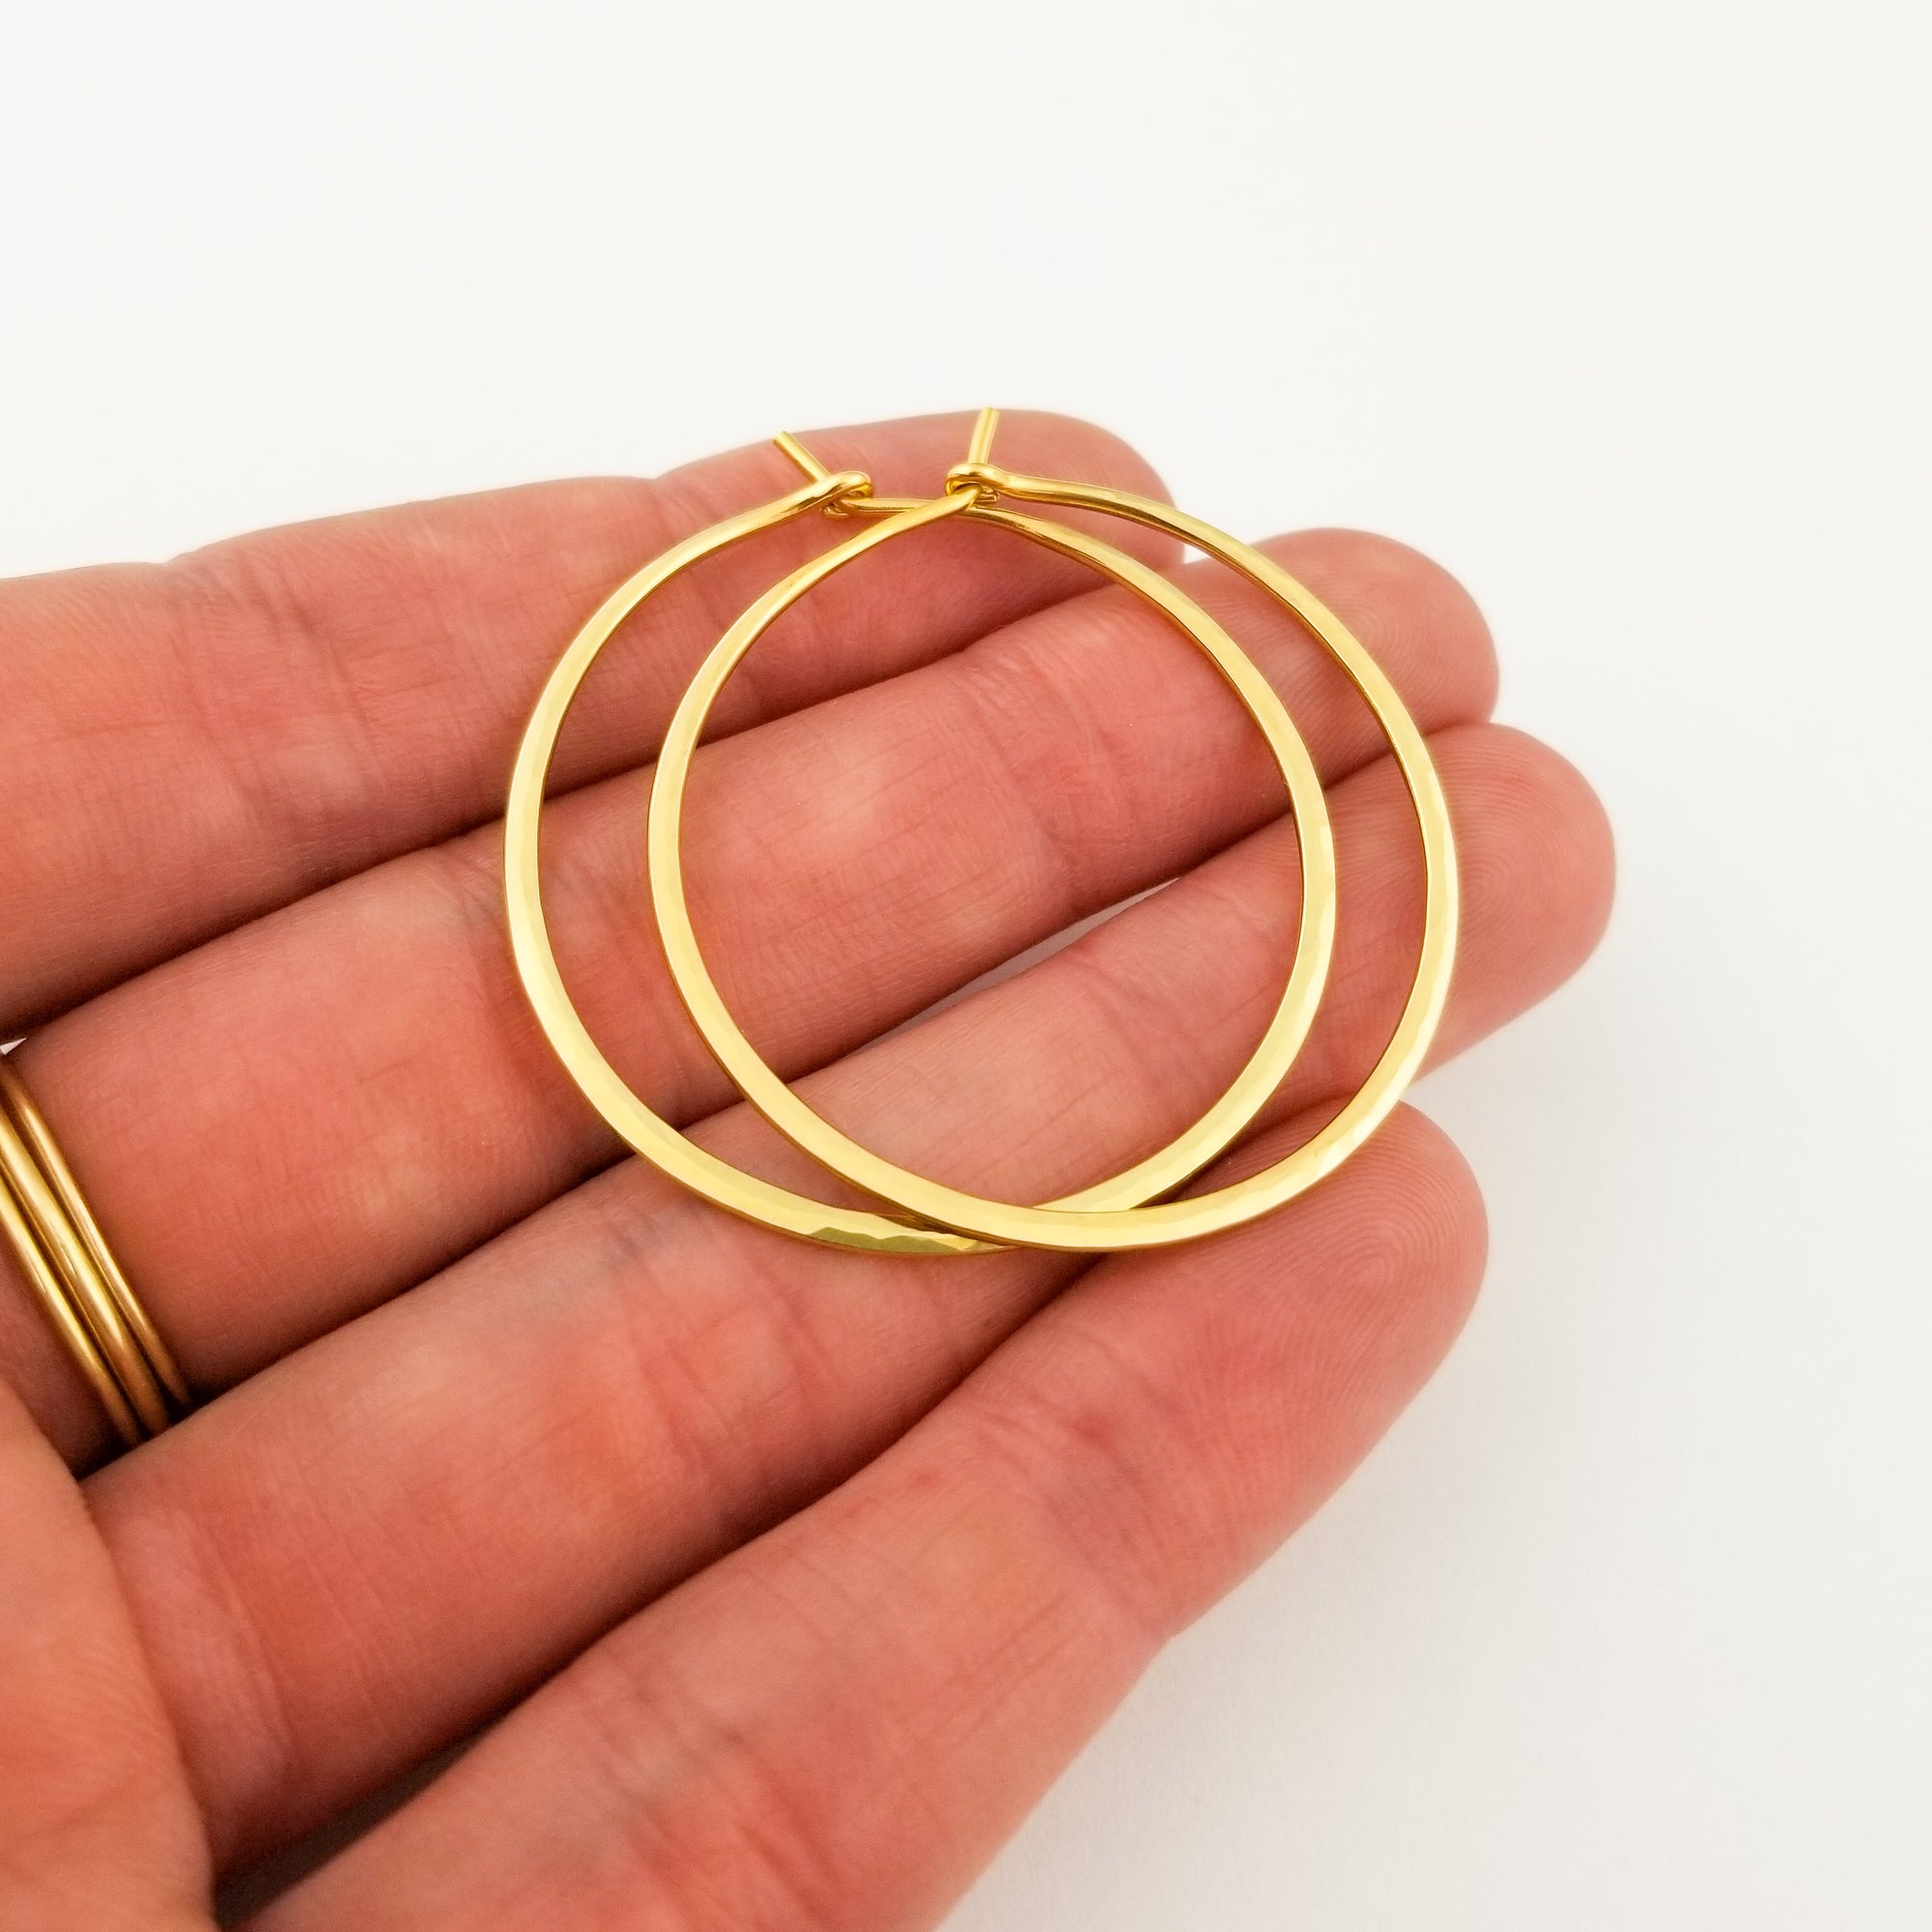 Extra Thick Solid 22 Karat Yellow Gold Hammered Hoop Earrings Held in Hand